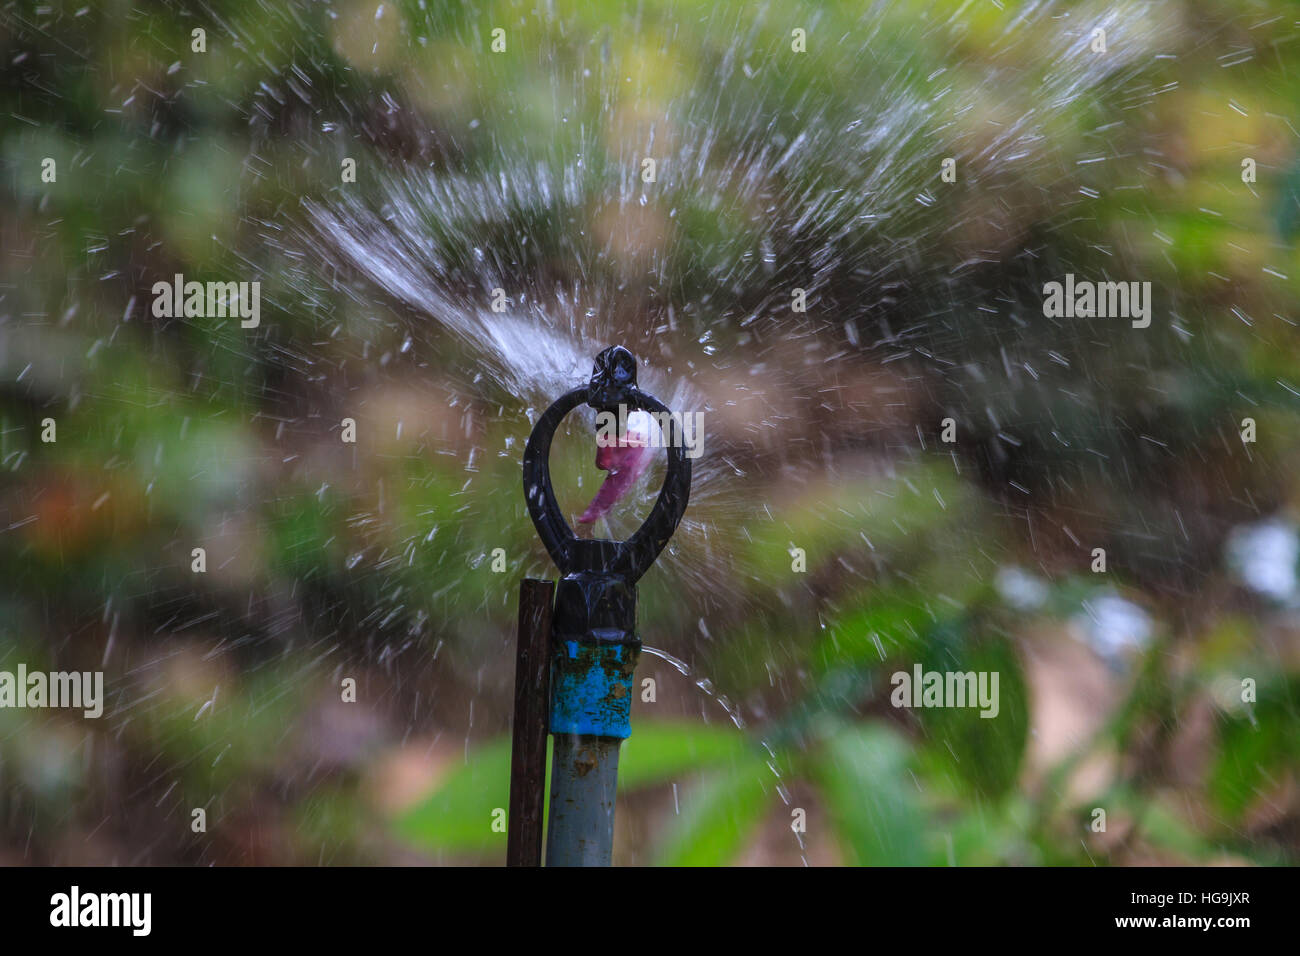 irrigation of agricultural field, water sprinkler Stock Photo